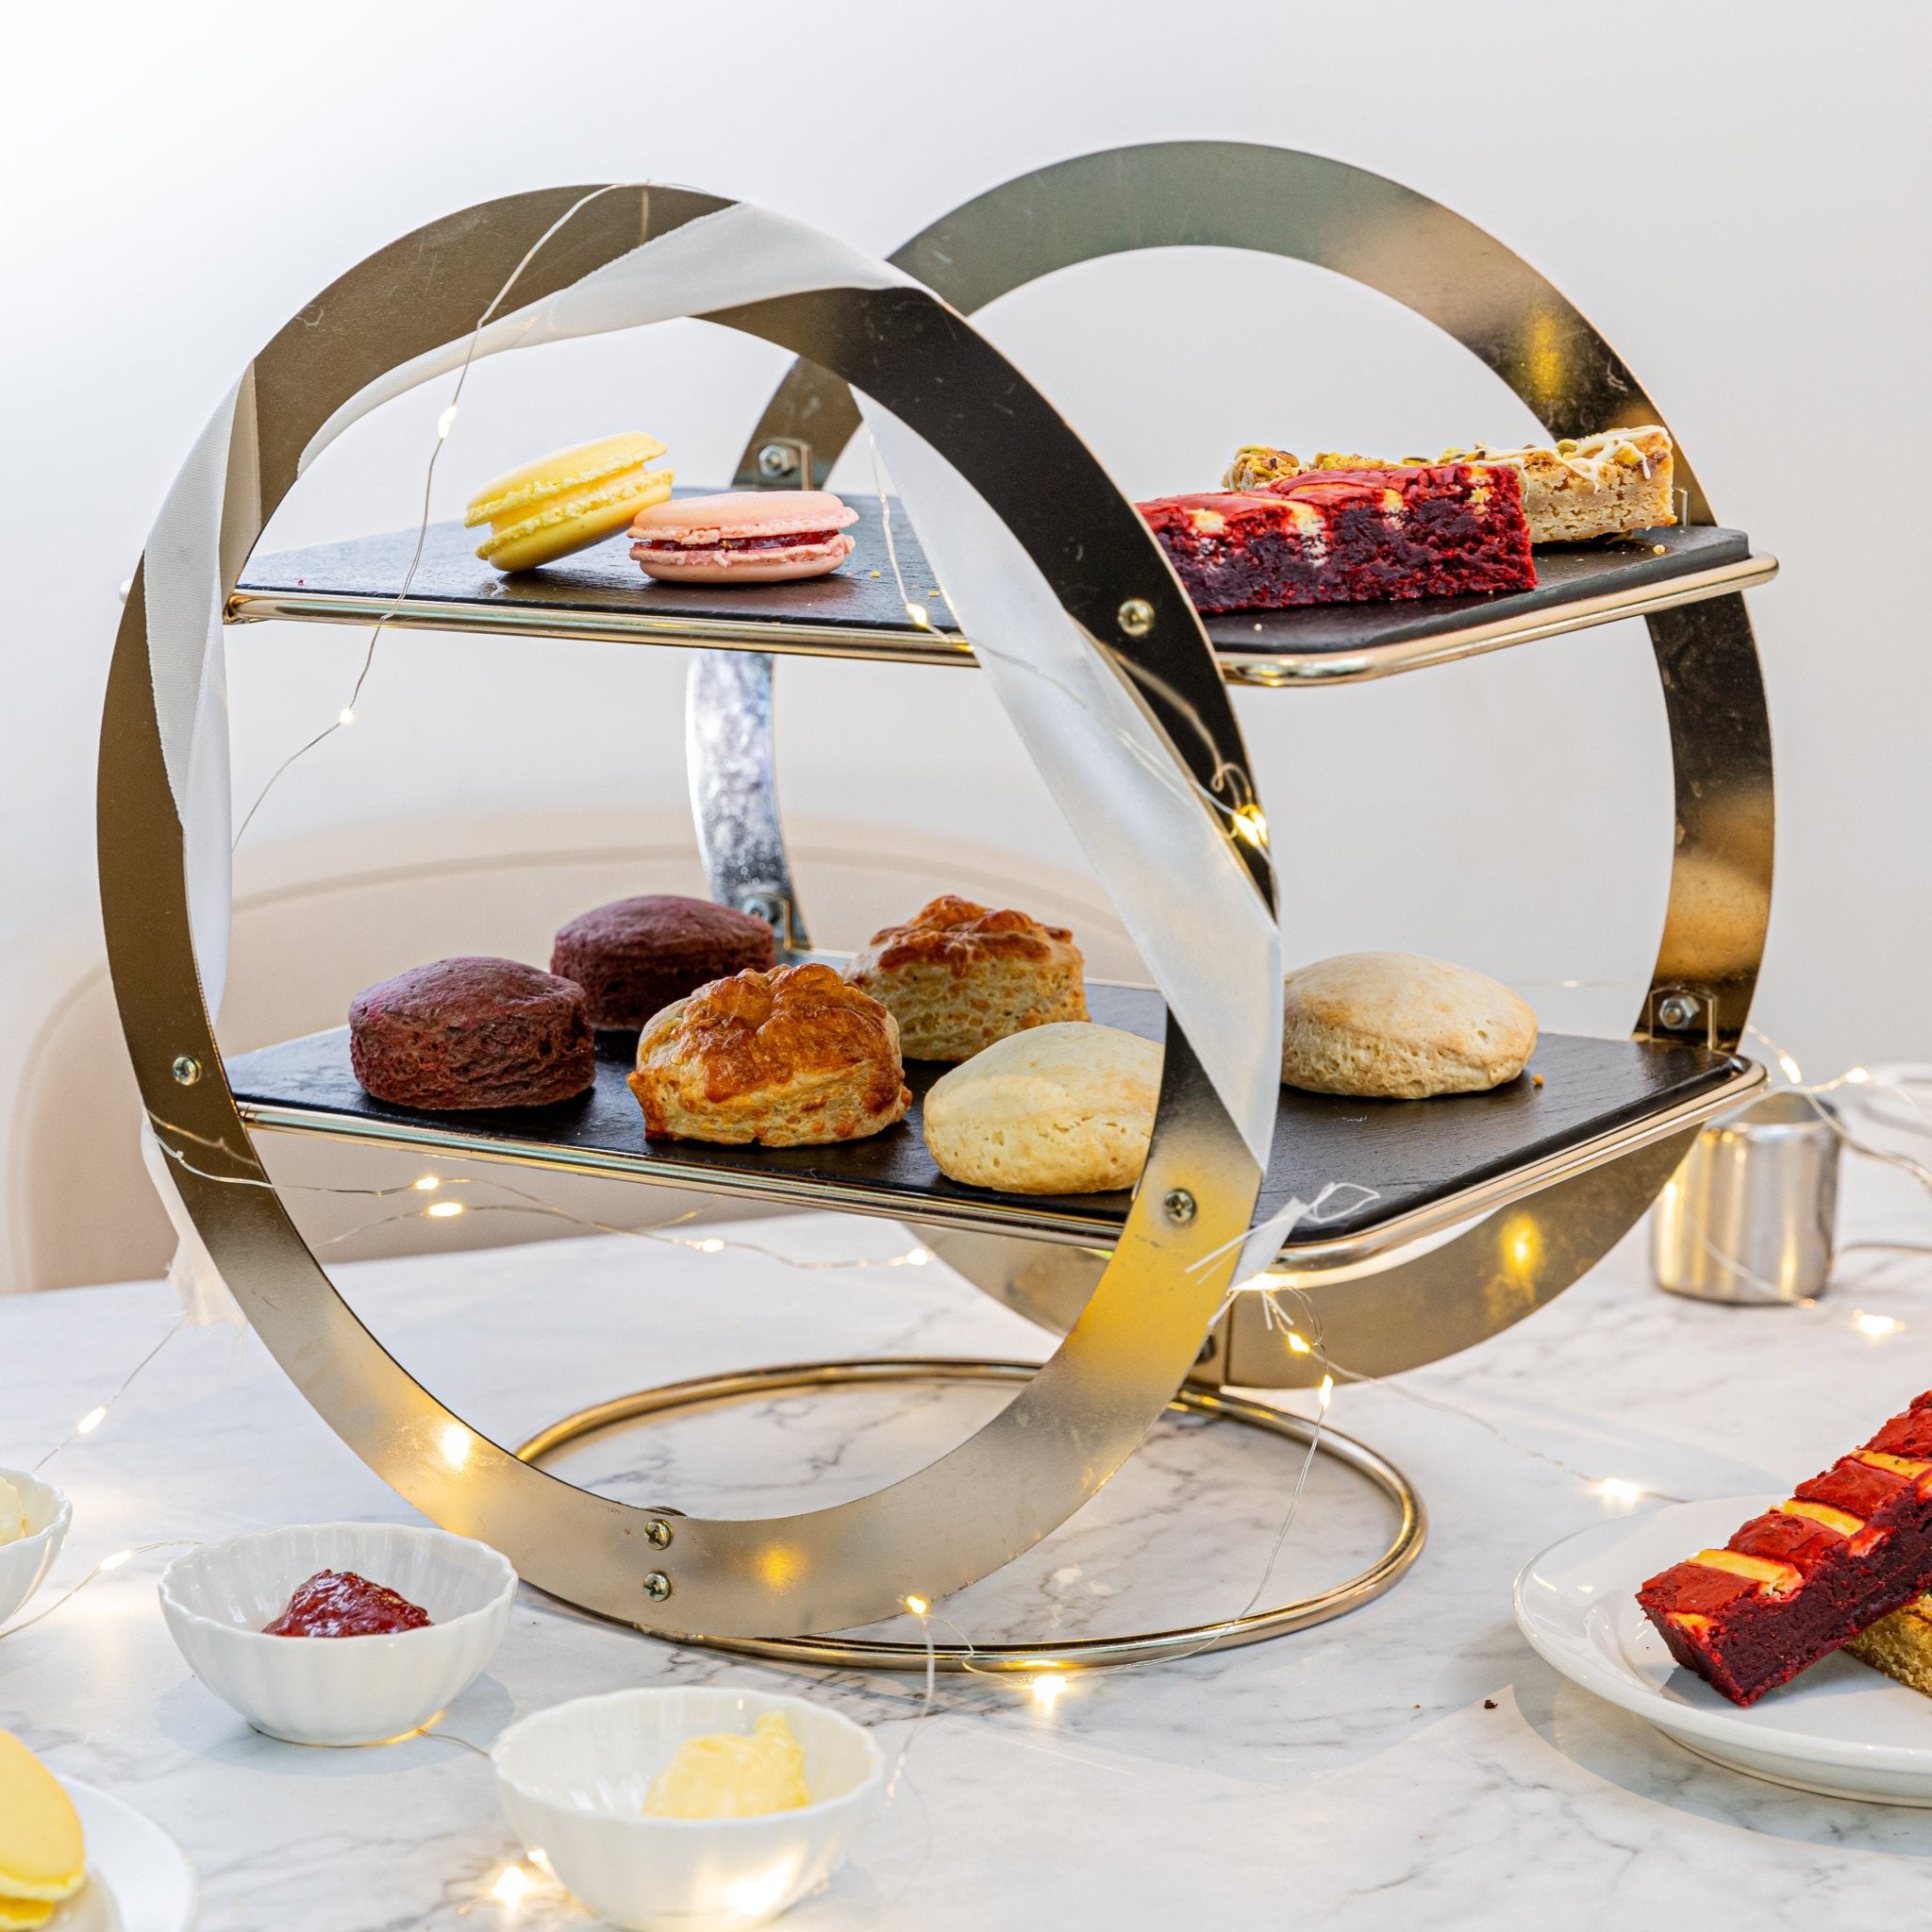 How were sweet treats introduced to the traditional Afternoon Tea